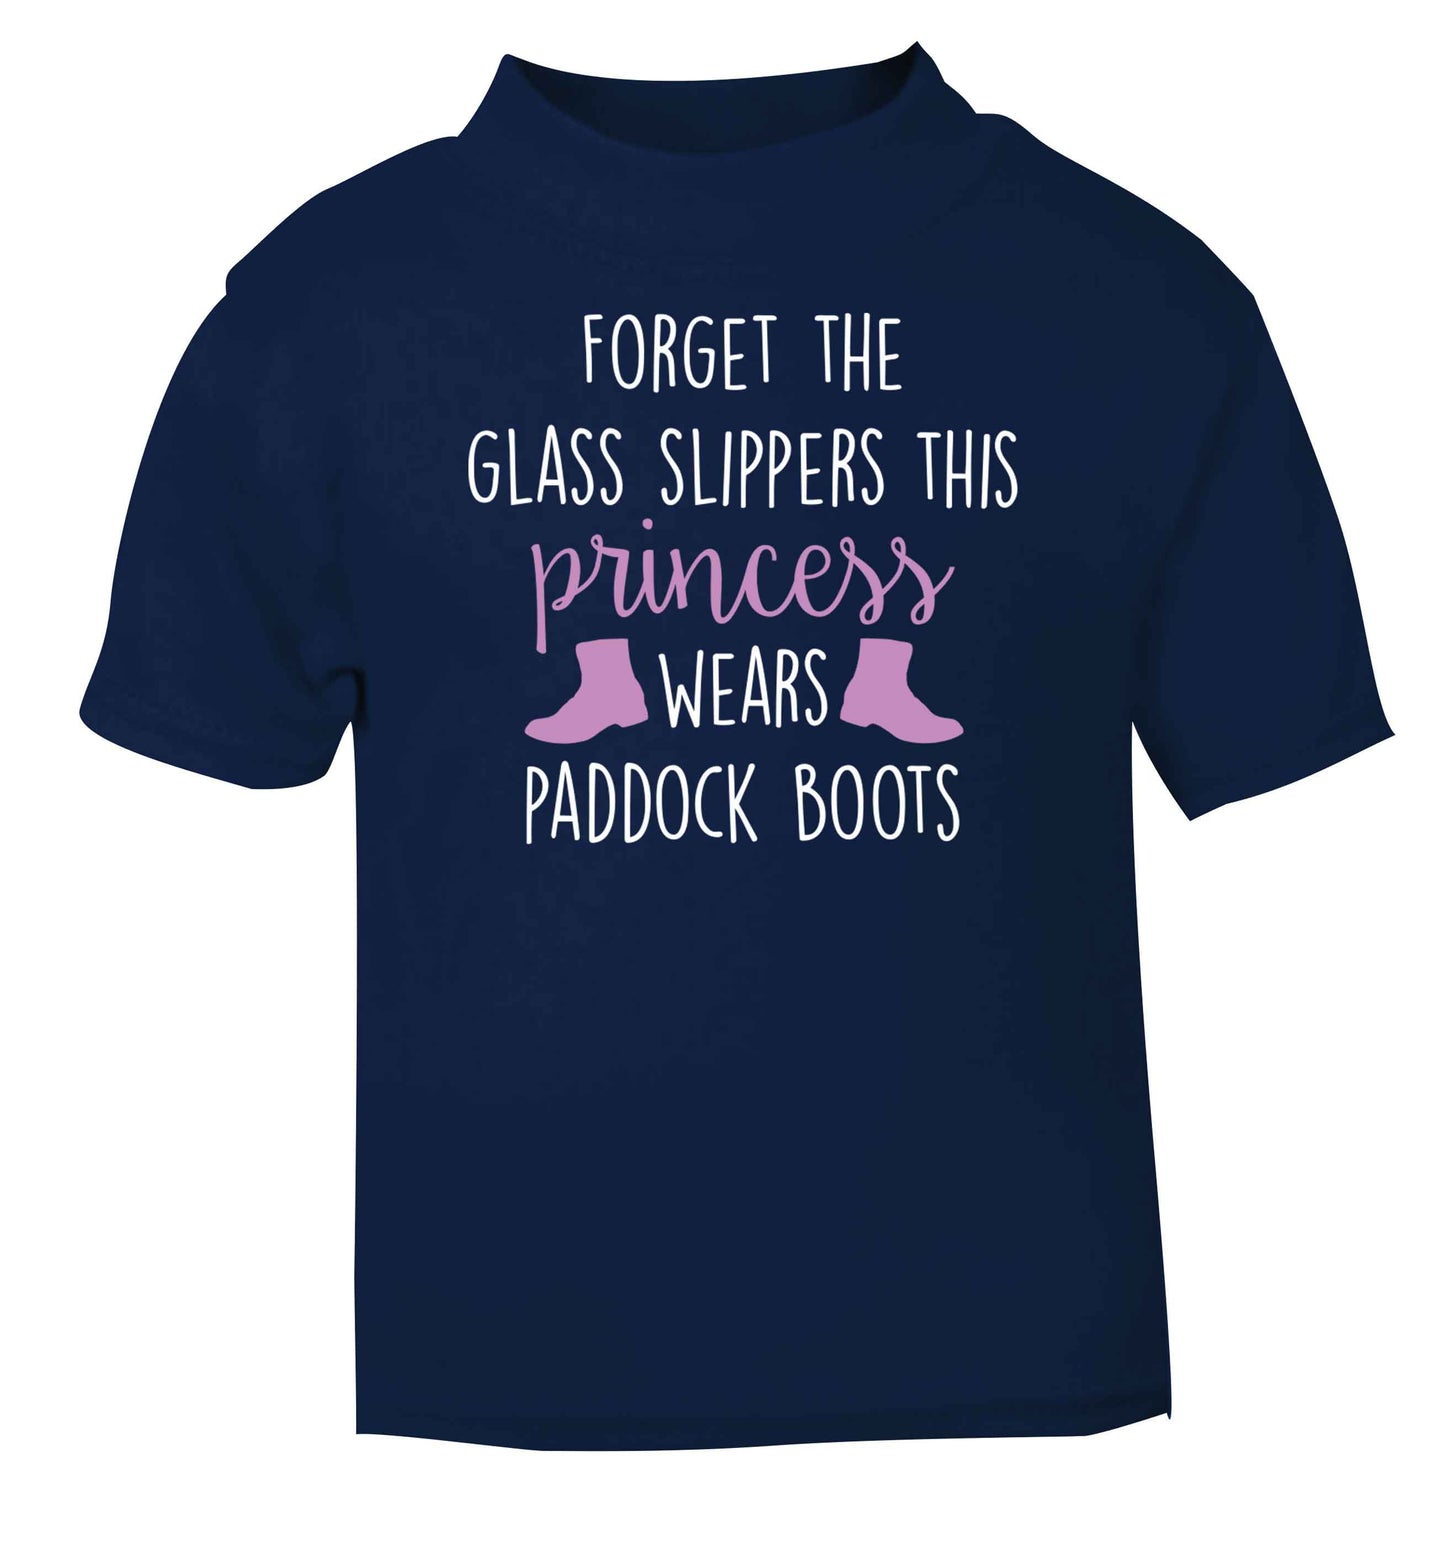 Forget the glass slippers this princess wears paddock boots navy baby toddler Tshirt 2 Years